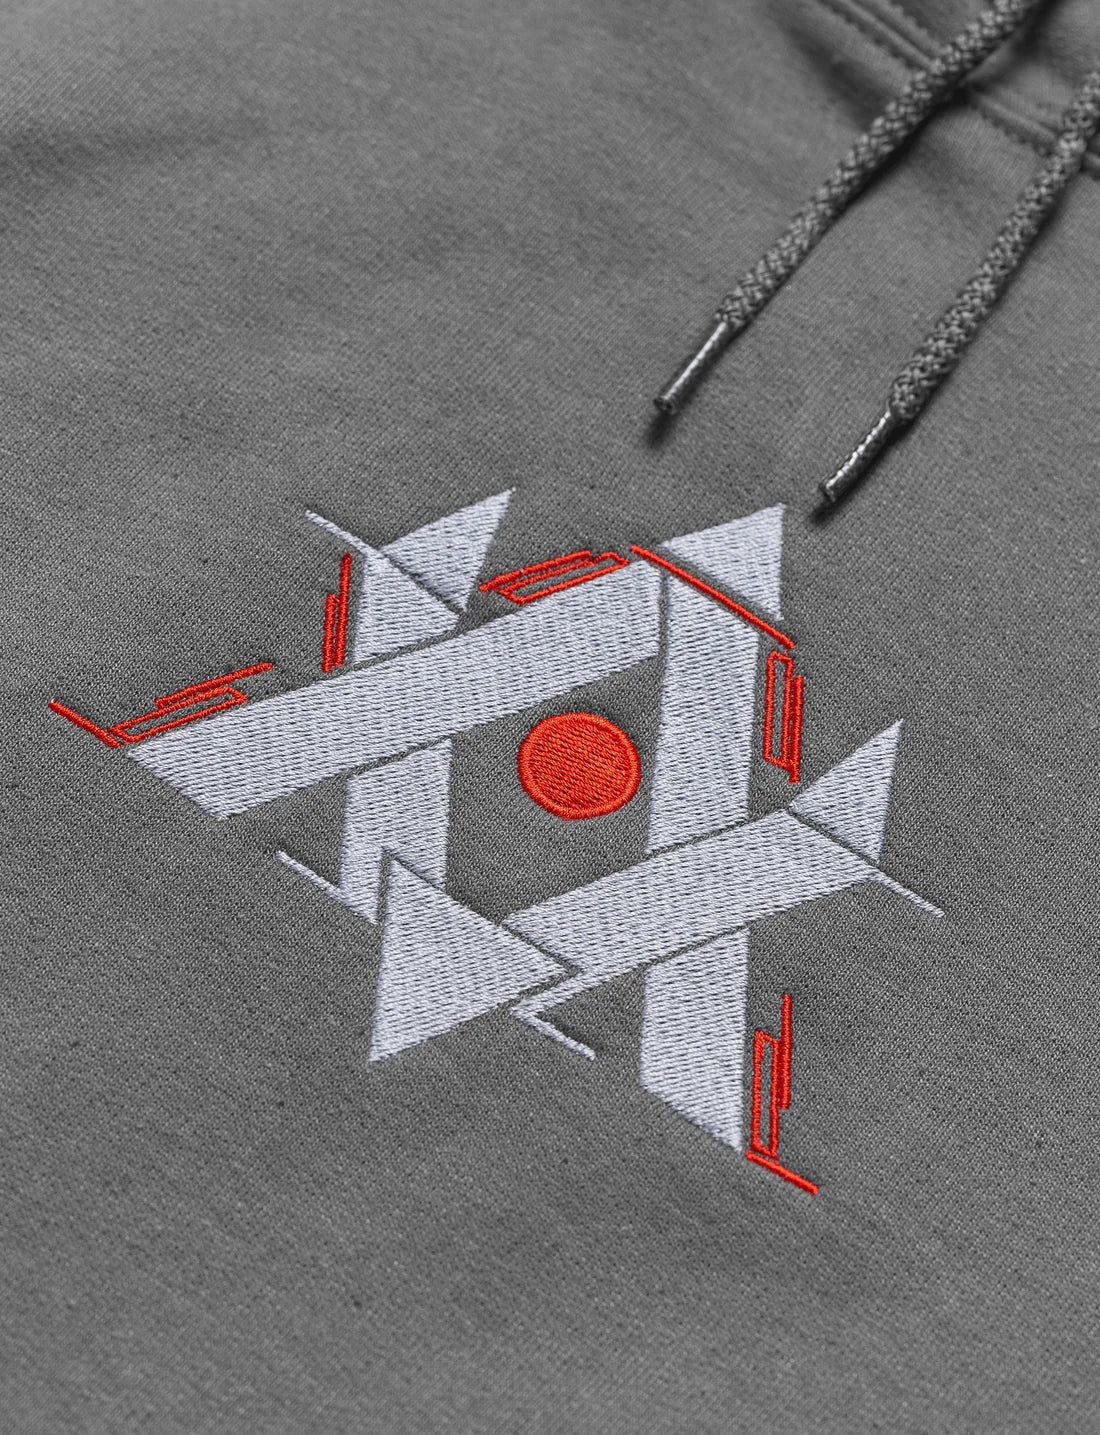 Detailed embroidery of a geometric gaming motif in red and white on a soft gray hoodie, offering a subtle nod to gamer identity.